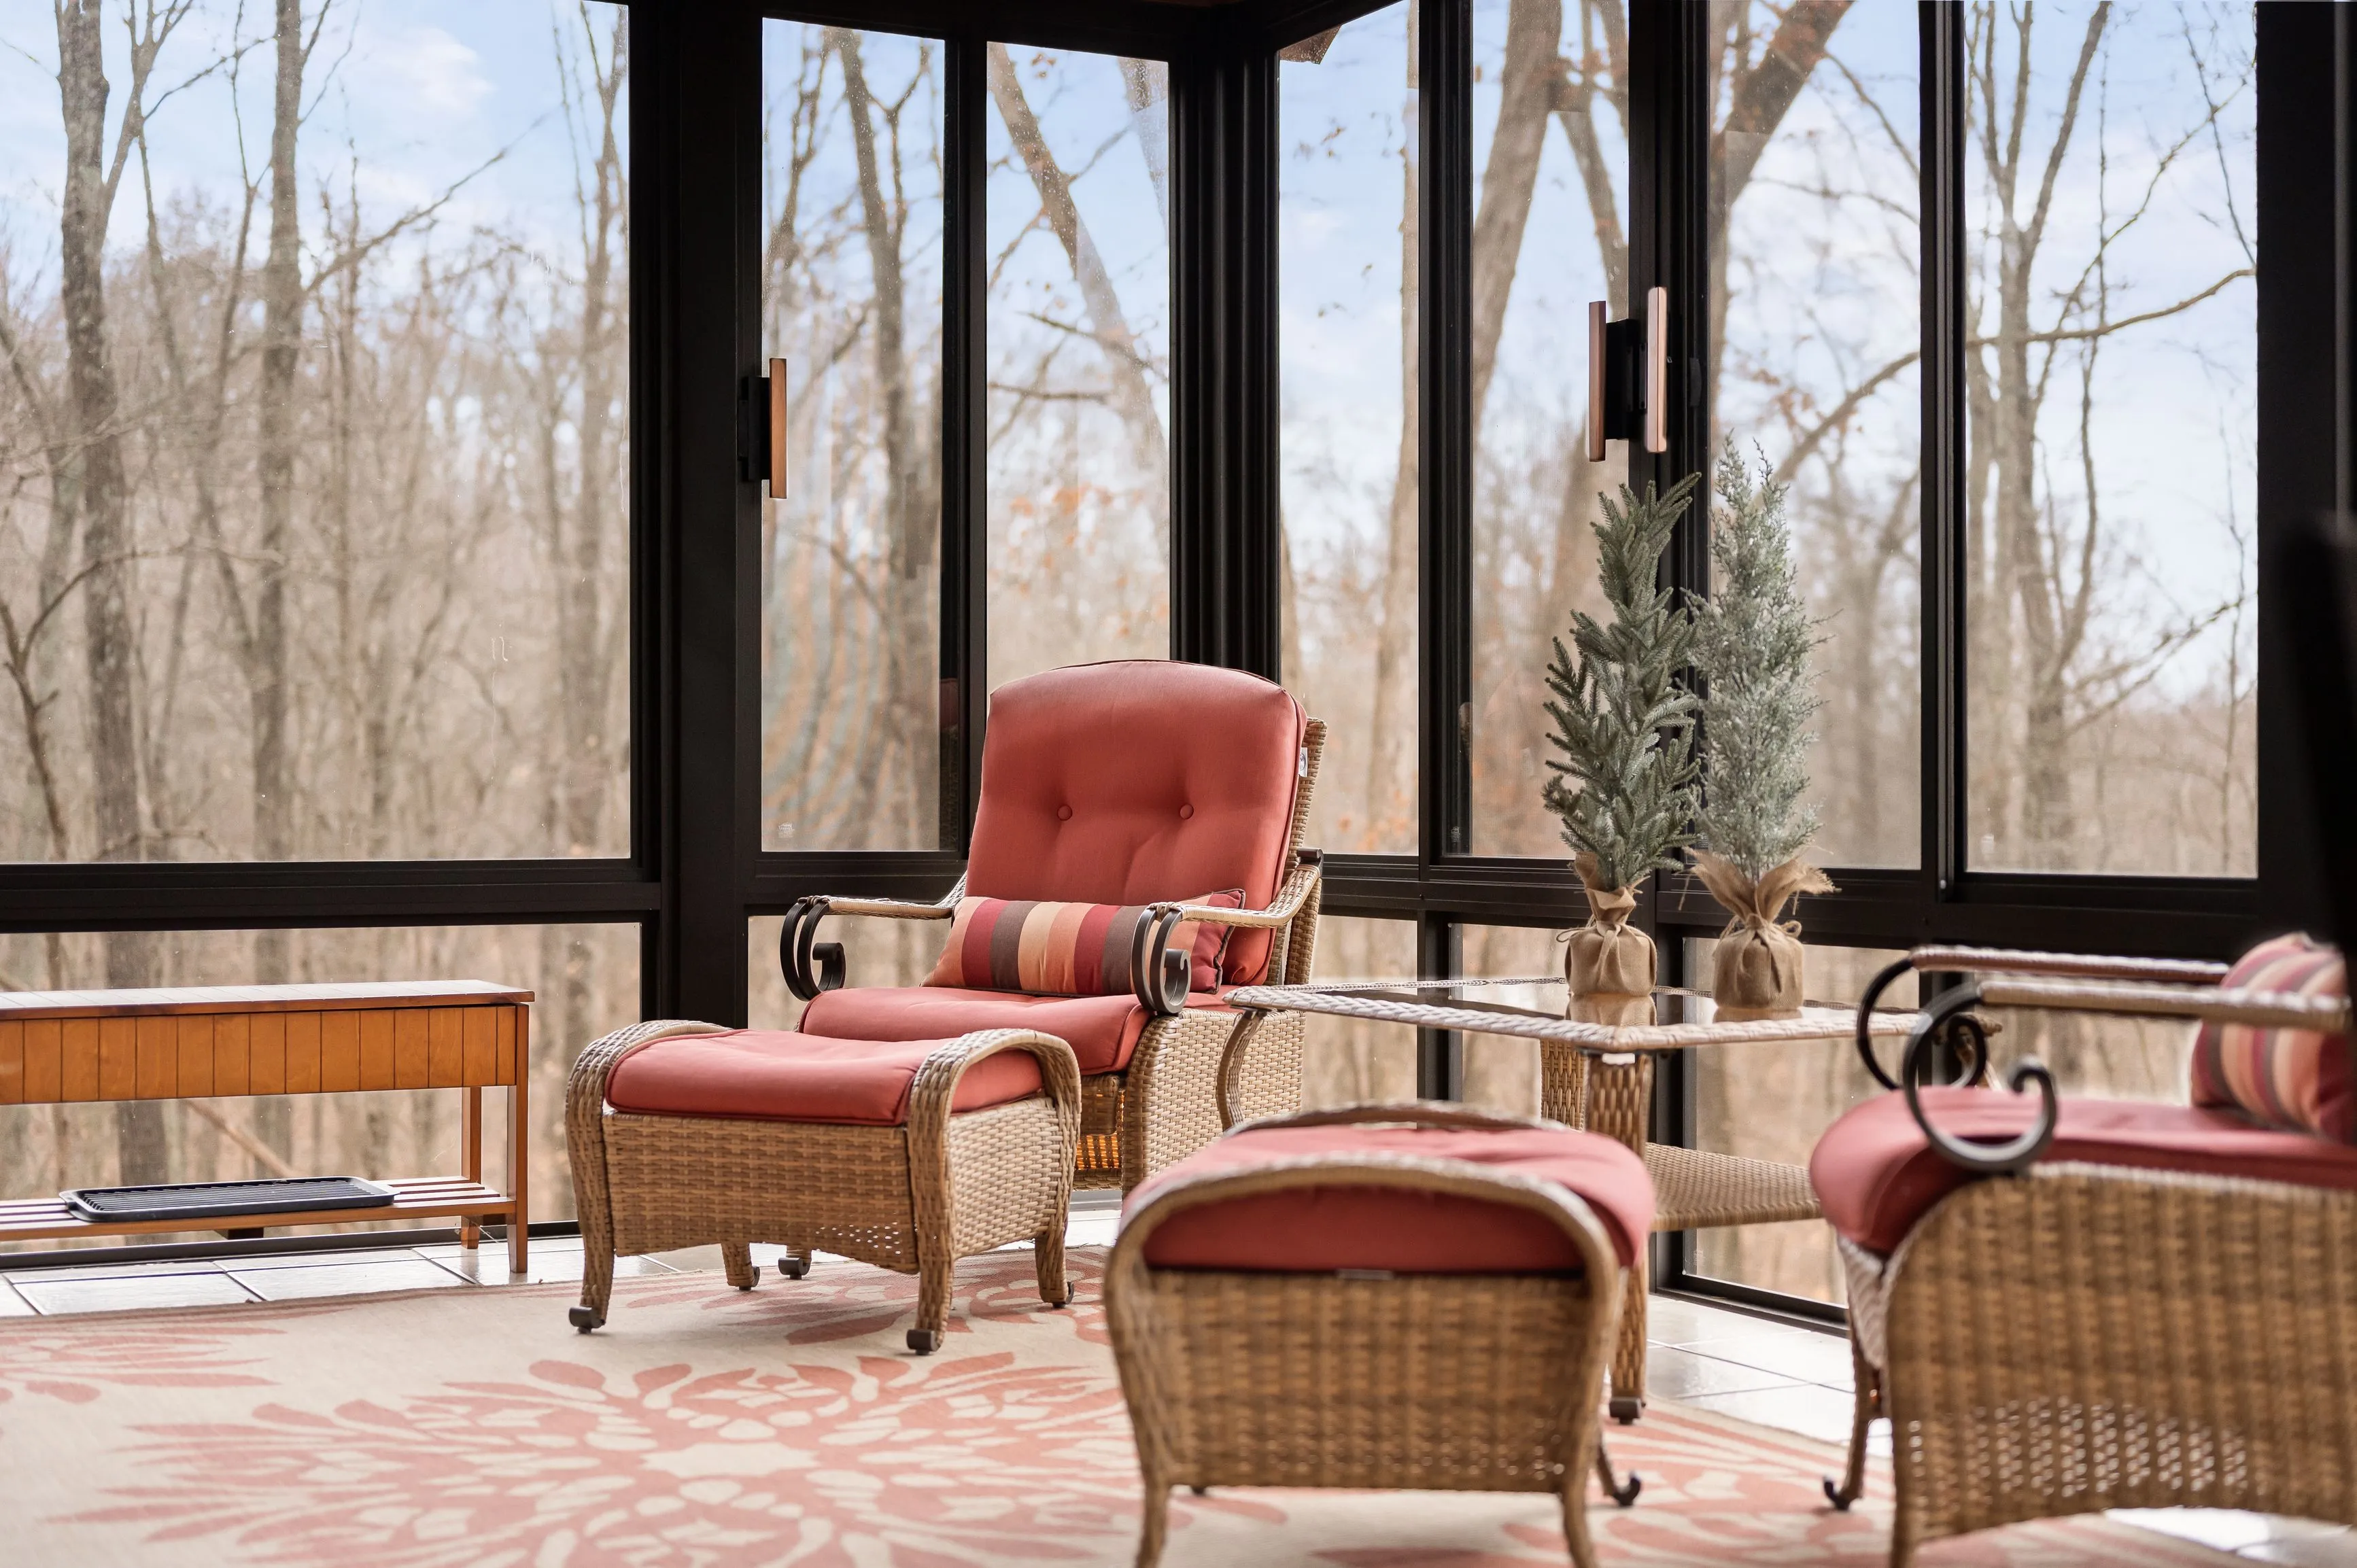 Cozy sunroom with wicker furniture, a red cushioned armchair and ottoman, and large windows overlooking bare trees.